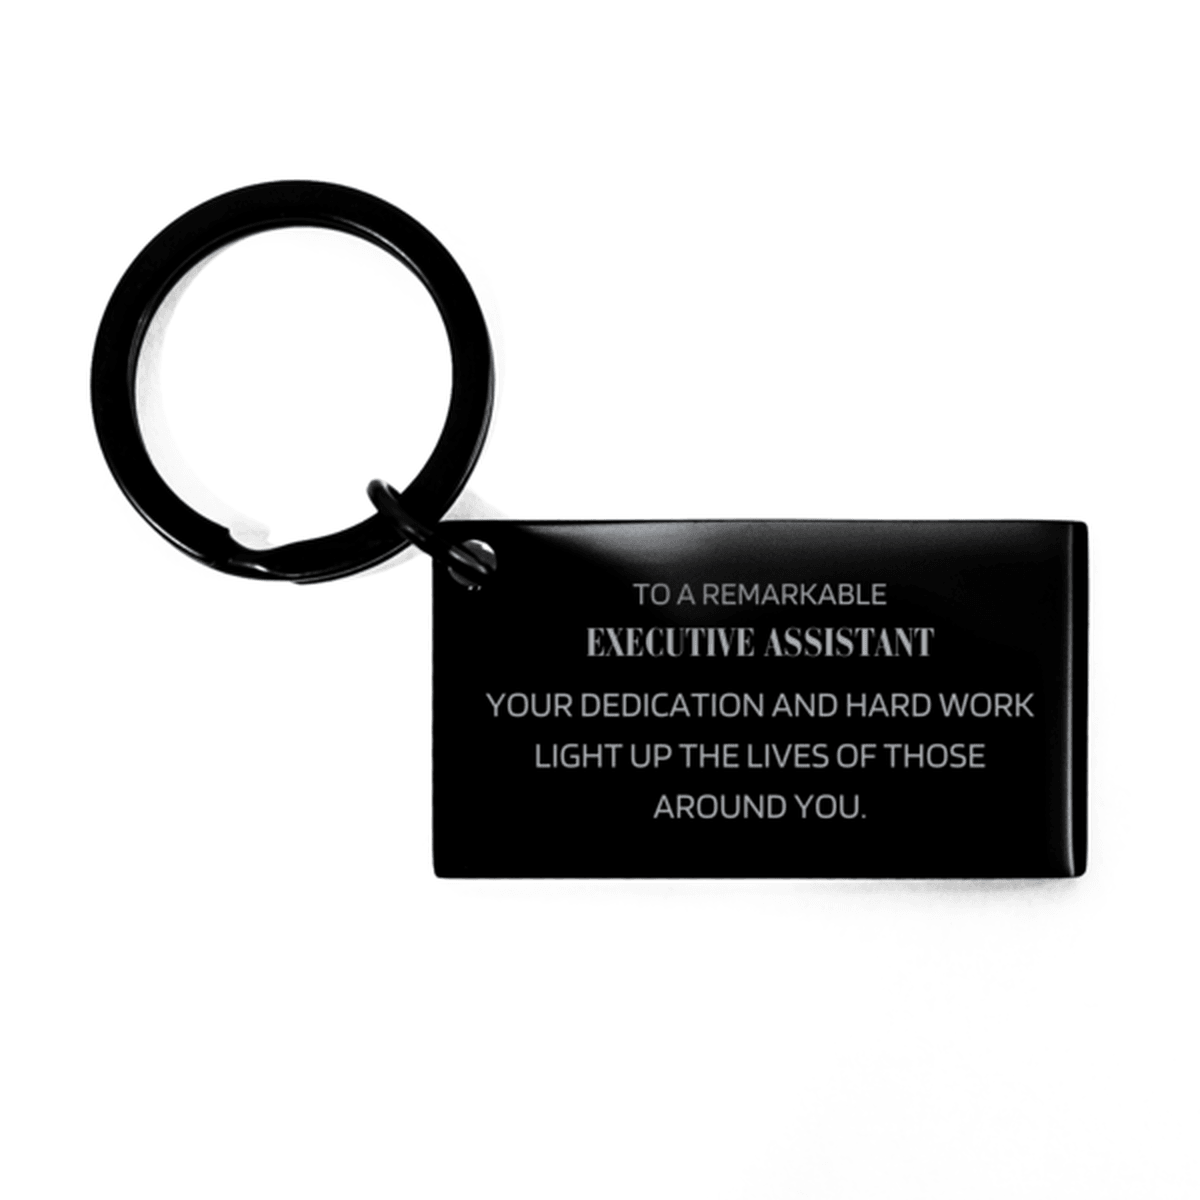 Remarkable Executive Assistant Gifts, Your dedication and hard work, Inspirational Birthday Christmas Unique Keychain For Executive Assistant, Coworkers, Men, Women, Friends - Mallard Moon Gift Shop